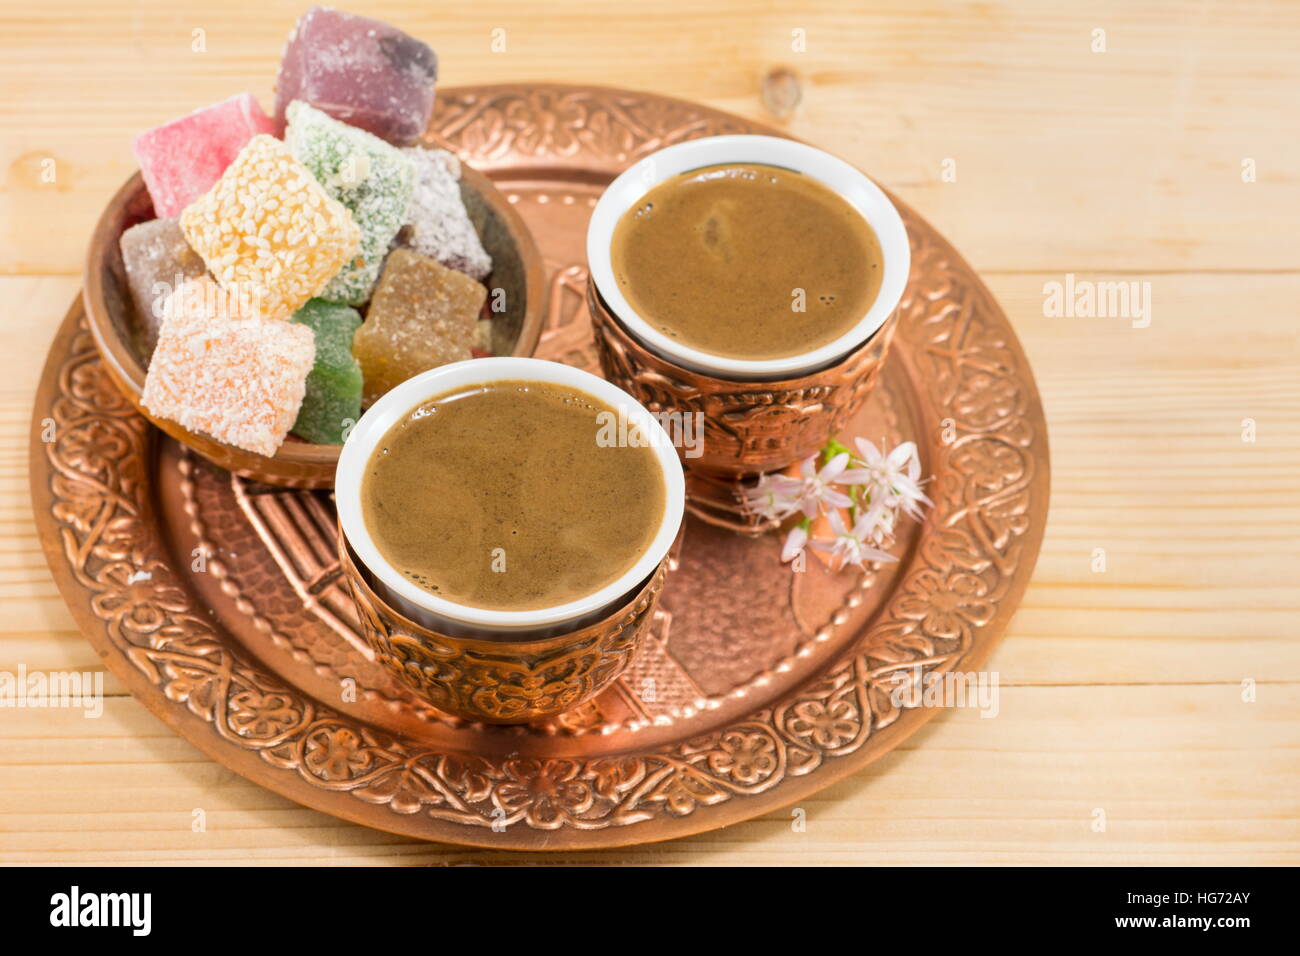 Coffee and Turkish delight in a copper kitchen utensils Stock Photo